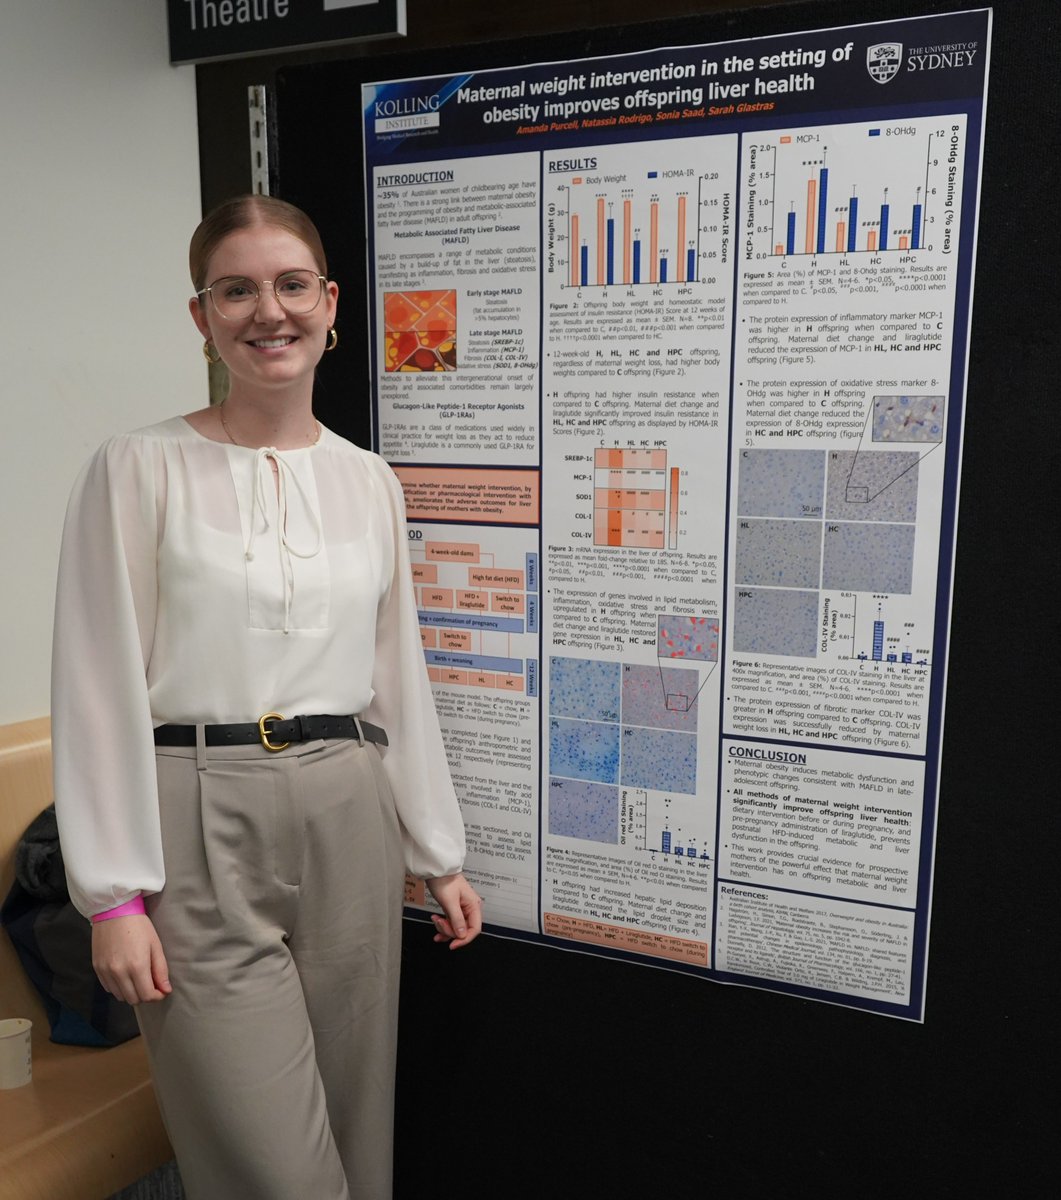 We'd like to congratulate @KollingINST researcher Amanda Purcell who’s taken out a sought-after award for the best poster presentation at the @Sydney_Uni HDR conference. Amanda is part of our renal research team investigating Type 1 diabetes. @syd_health @NthSydHealth